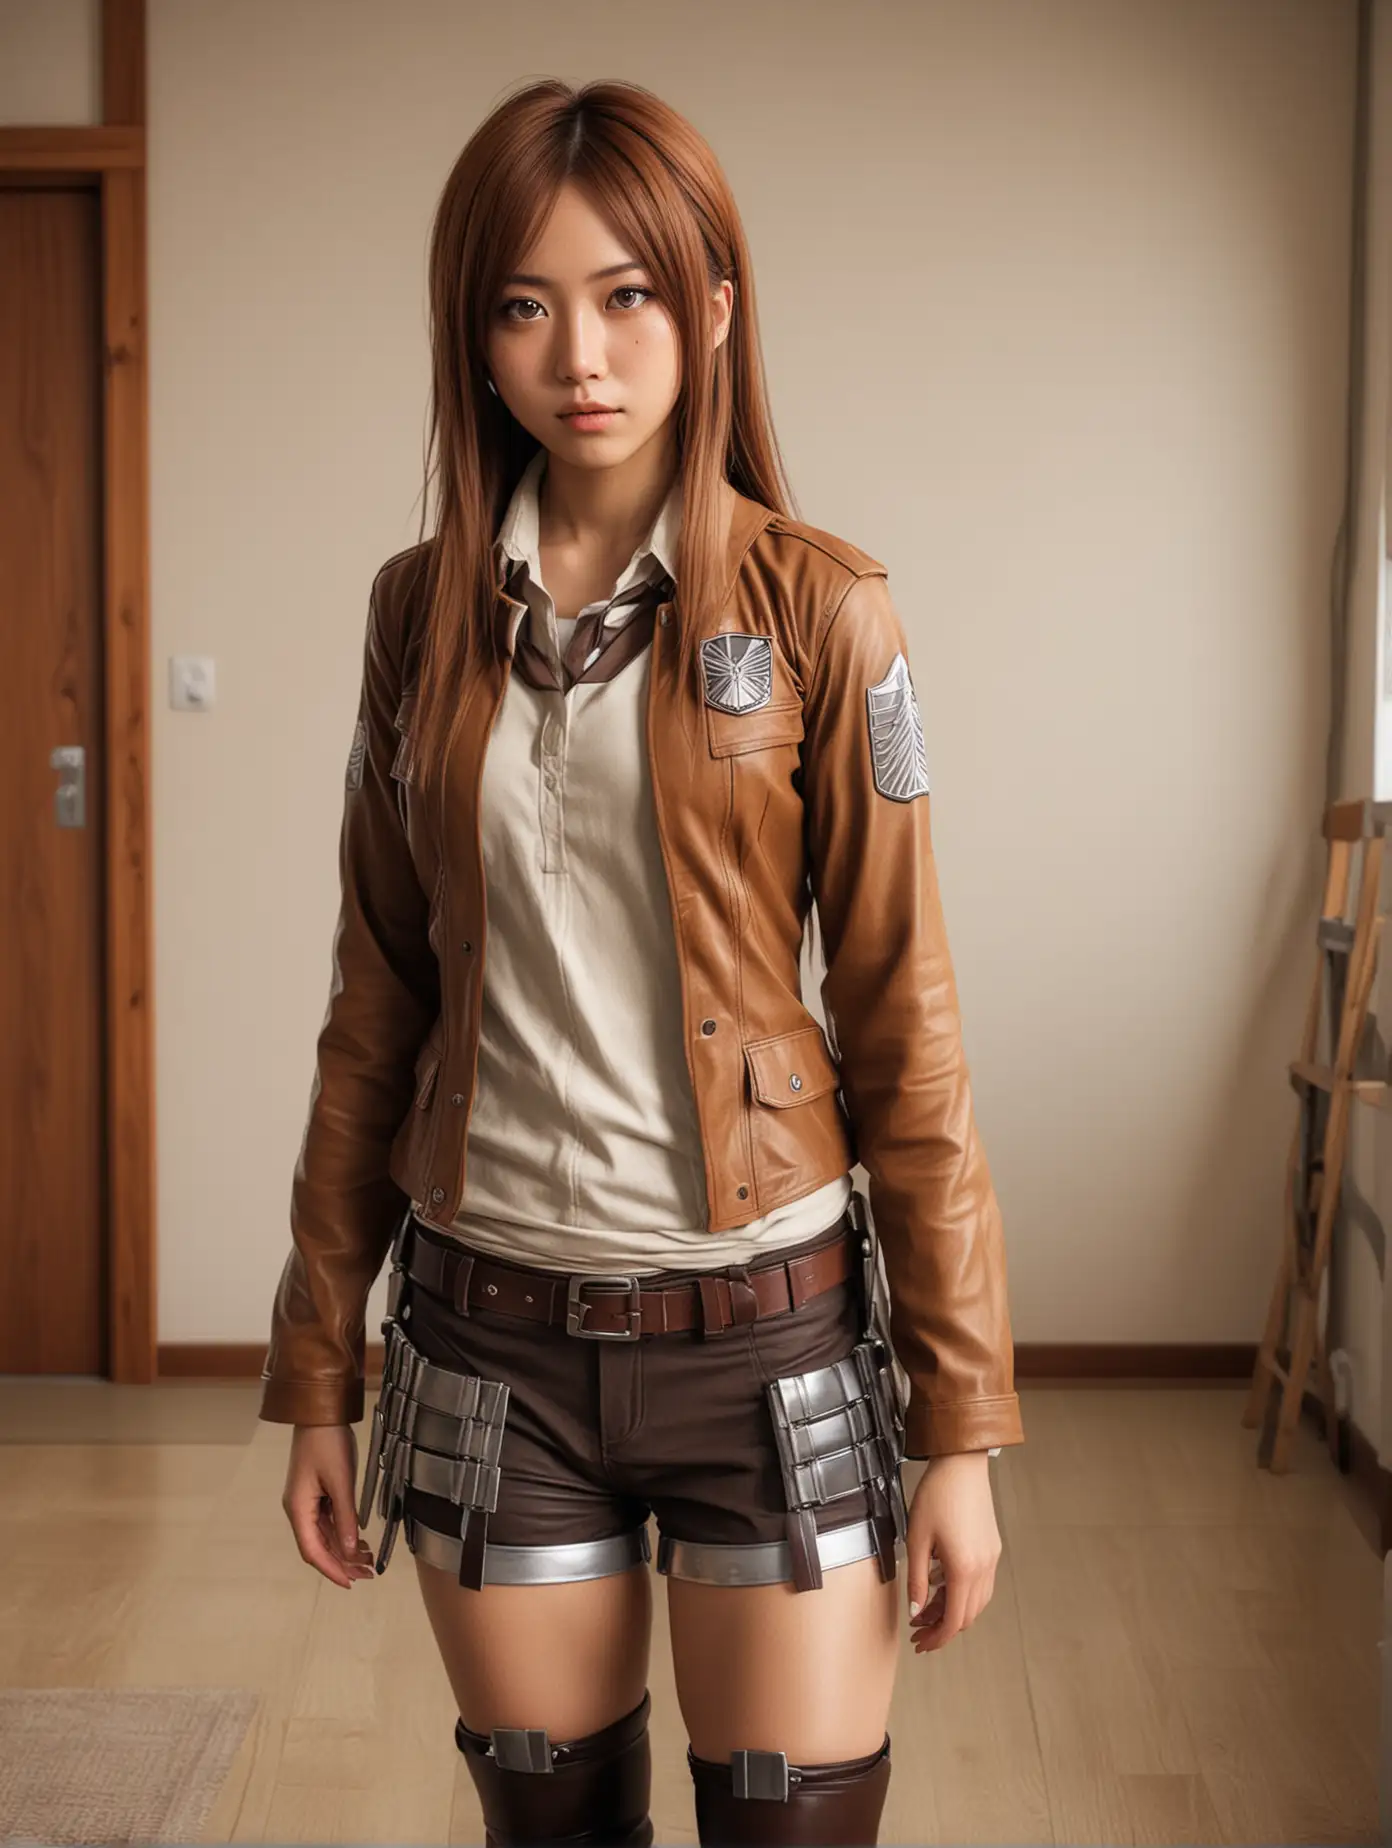 Hyperrealistic Japanese Girl in Attack on Titan Costume